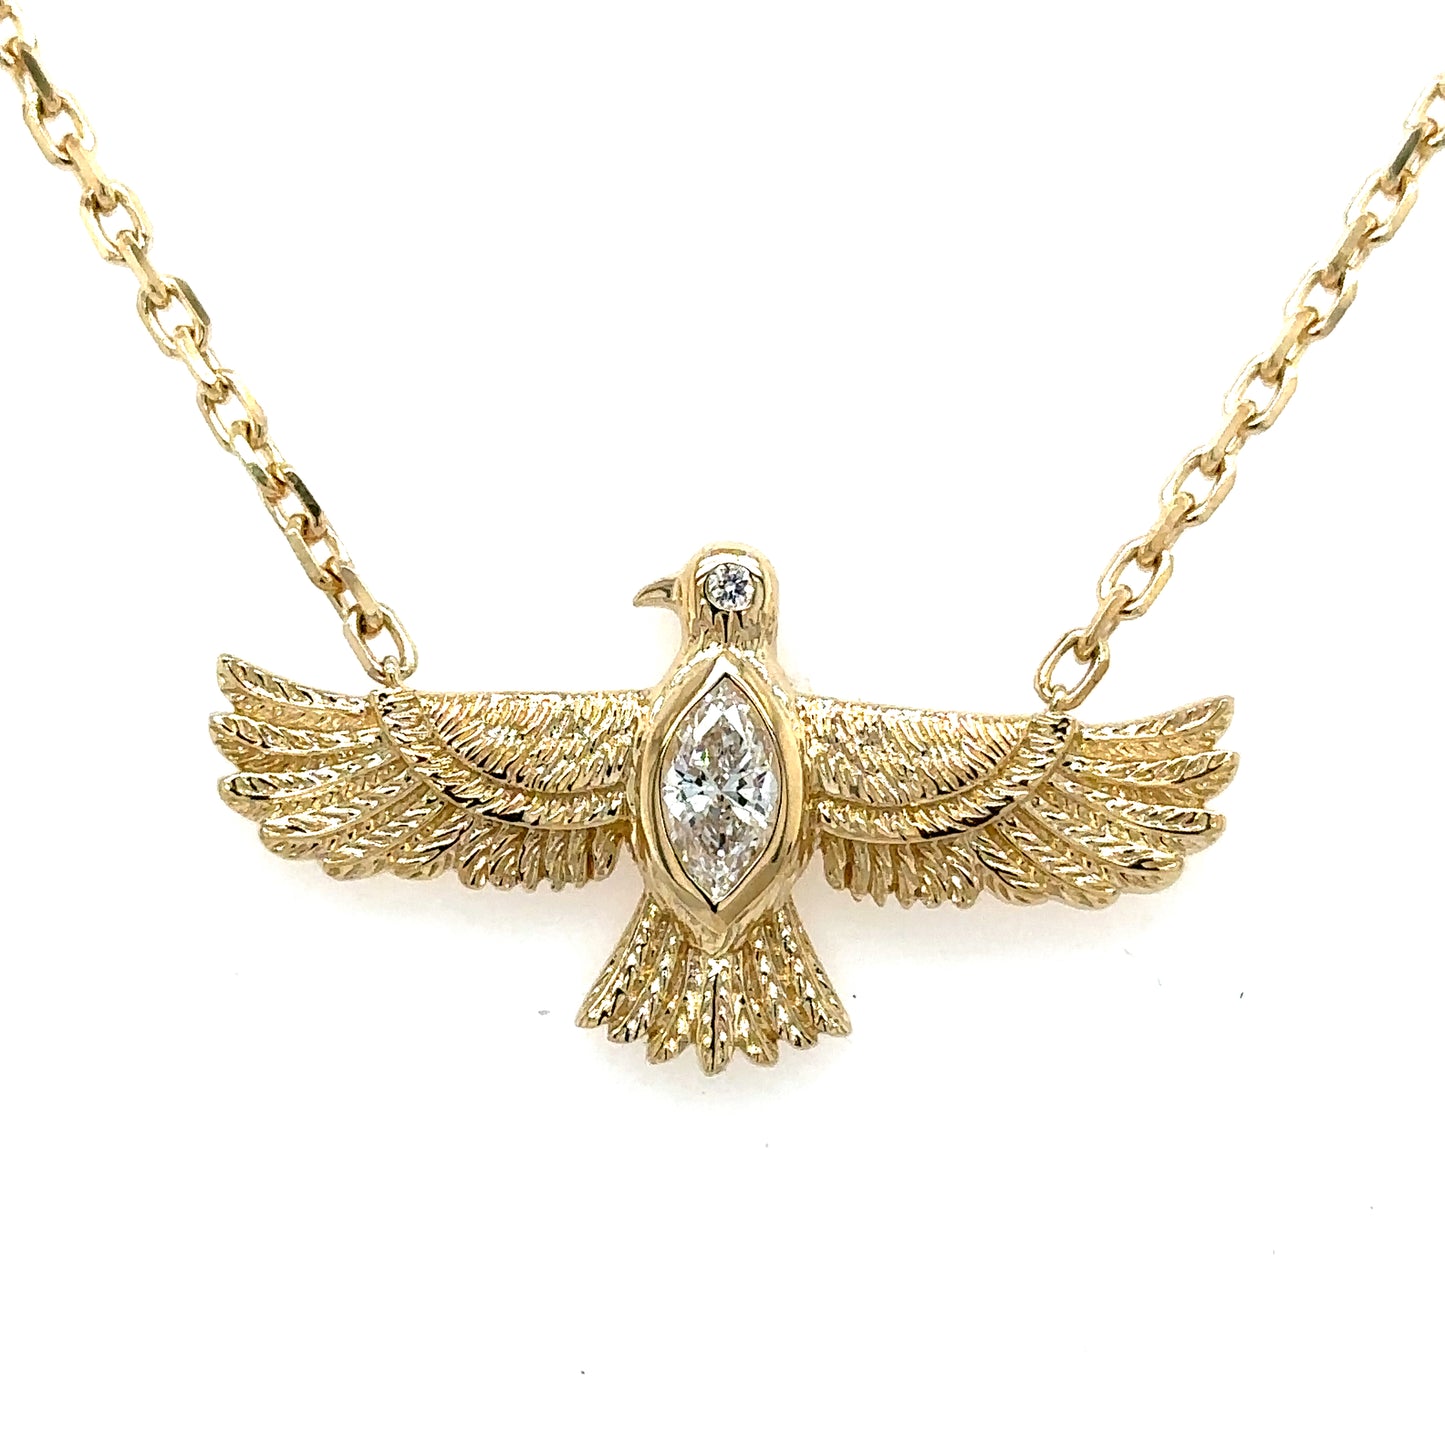 The Rising Phoenix Necklace